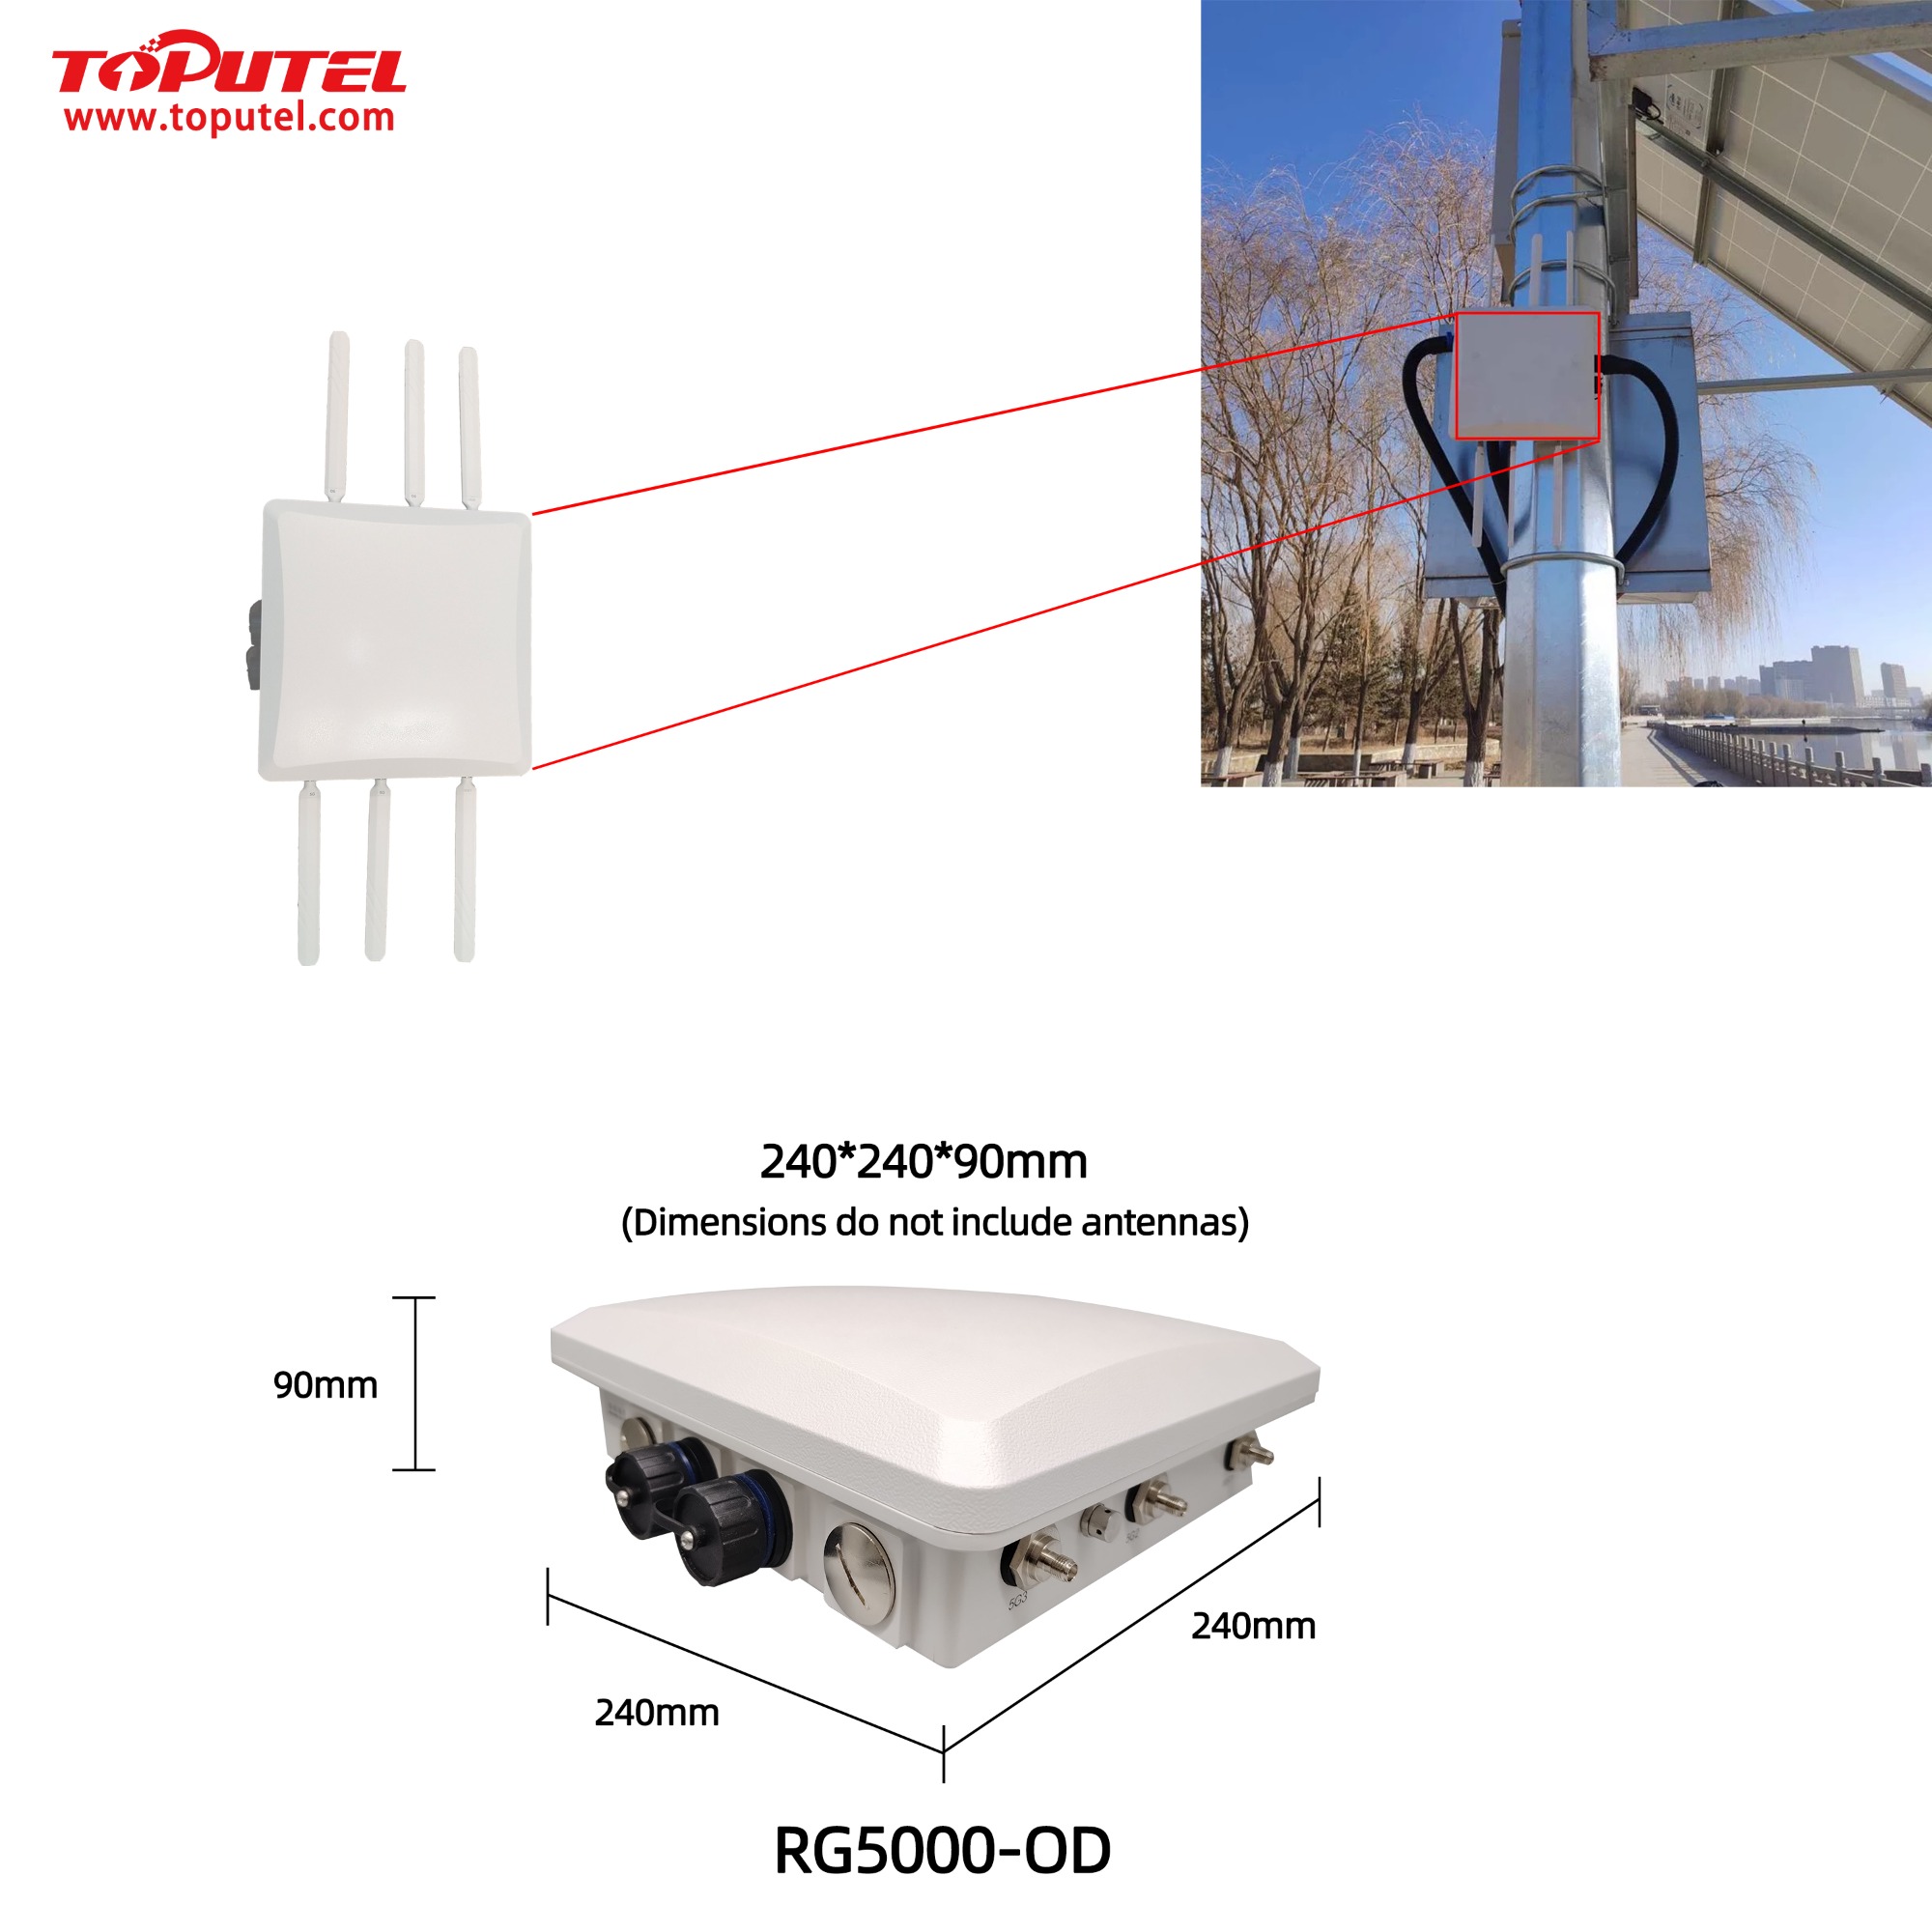 Router device size, placed on light-pole for video surveillance + solar data collection  - 5G Industrial Router RG5000-OD 